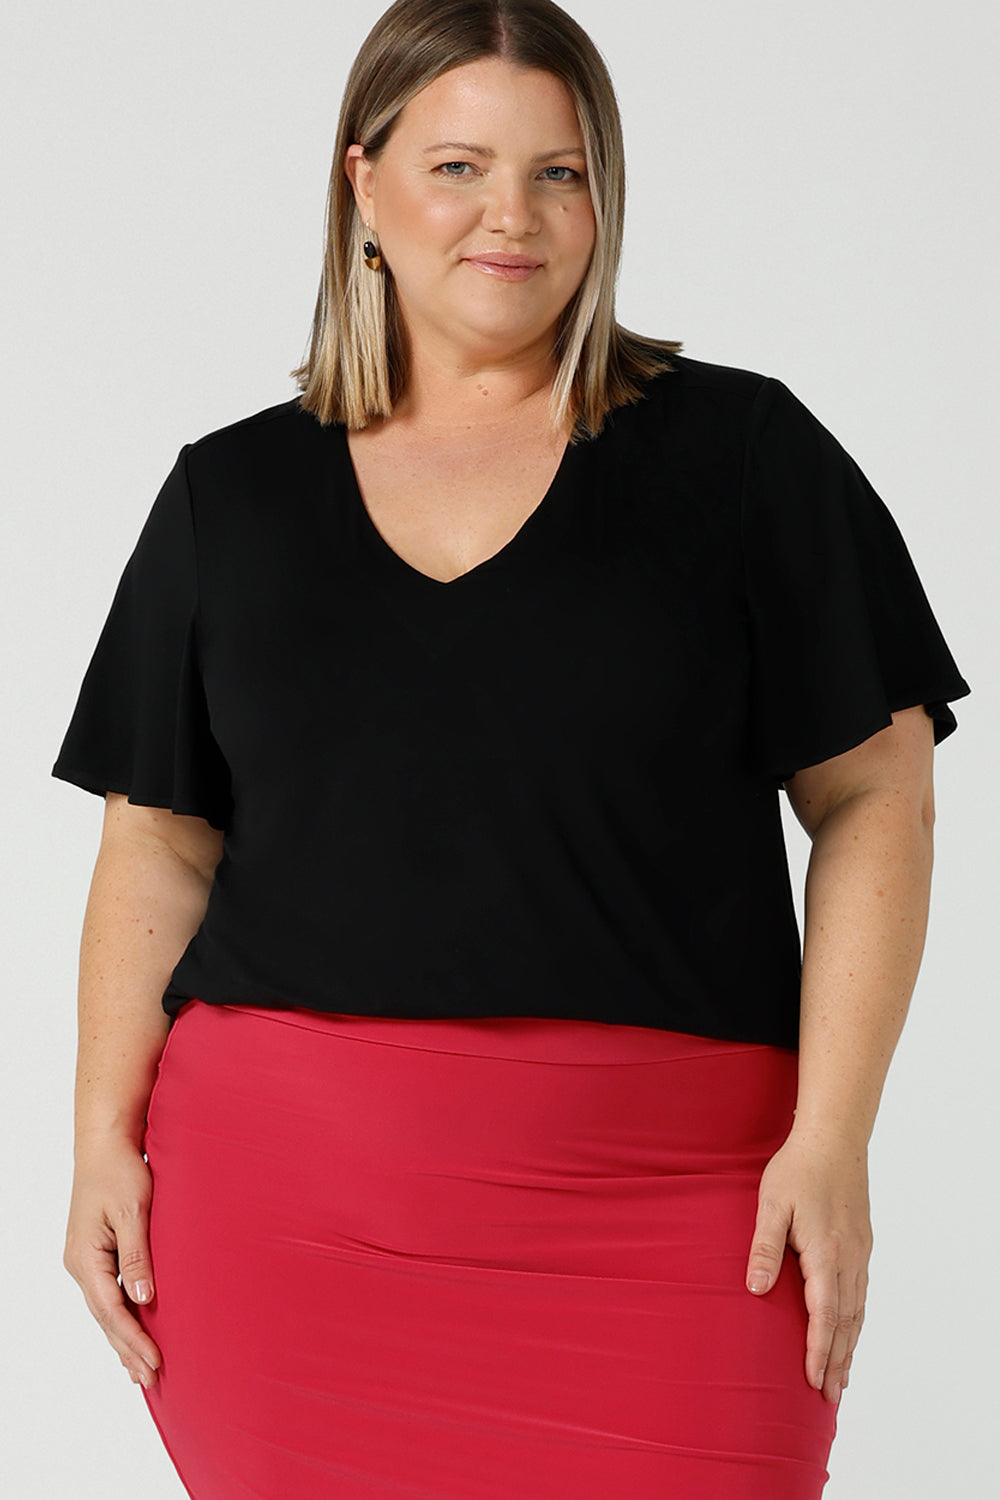 Close up of a flutter sleeve, black top for work and casual wear, this tailored top is worn by a size 18 curvy woman. Made in Australia, shop women's black tops online at Australian and New Zealand women's clothing brand, Leina & Fleur.